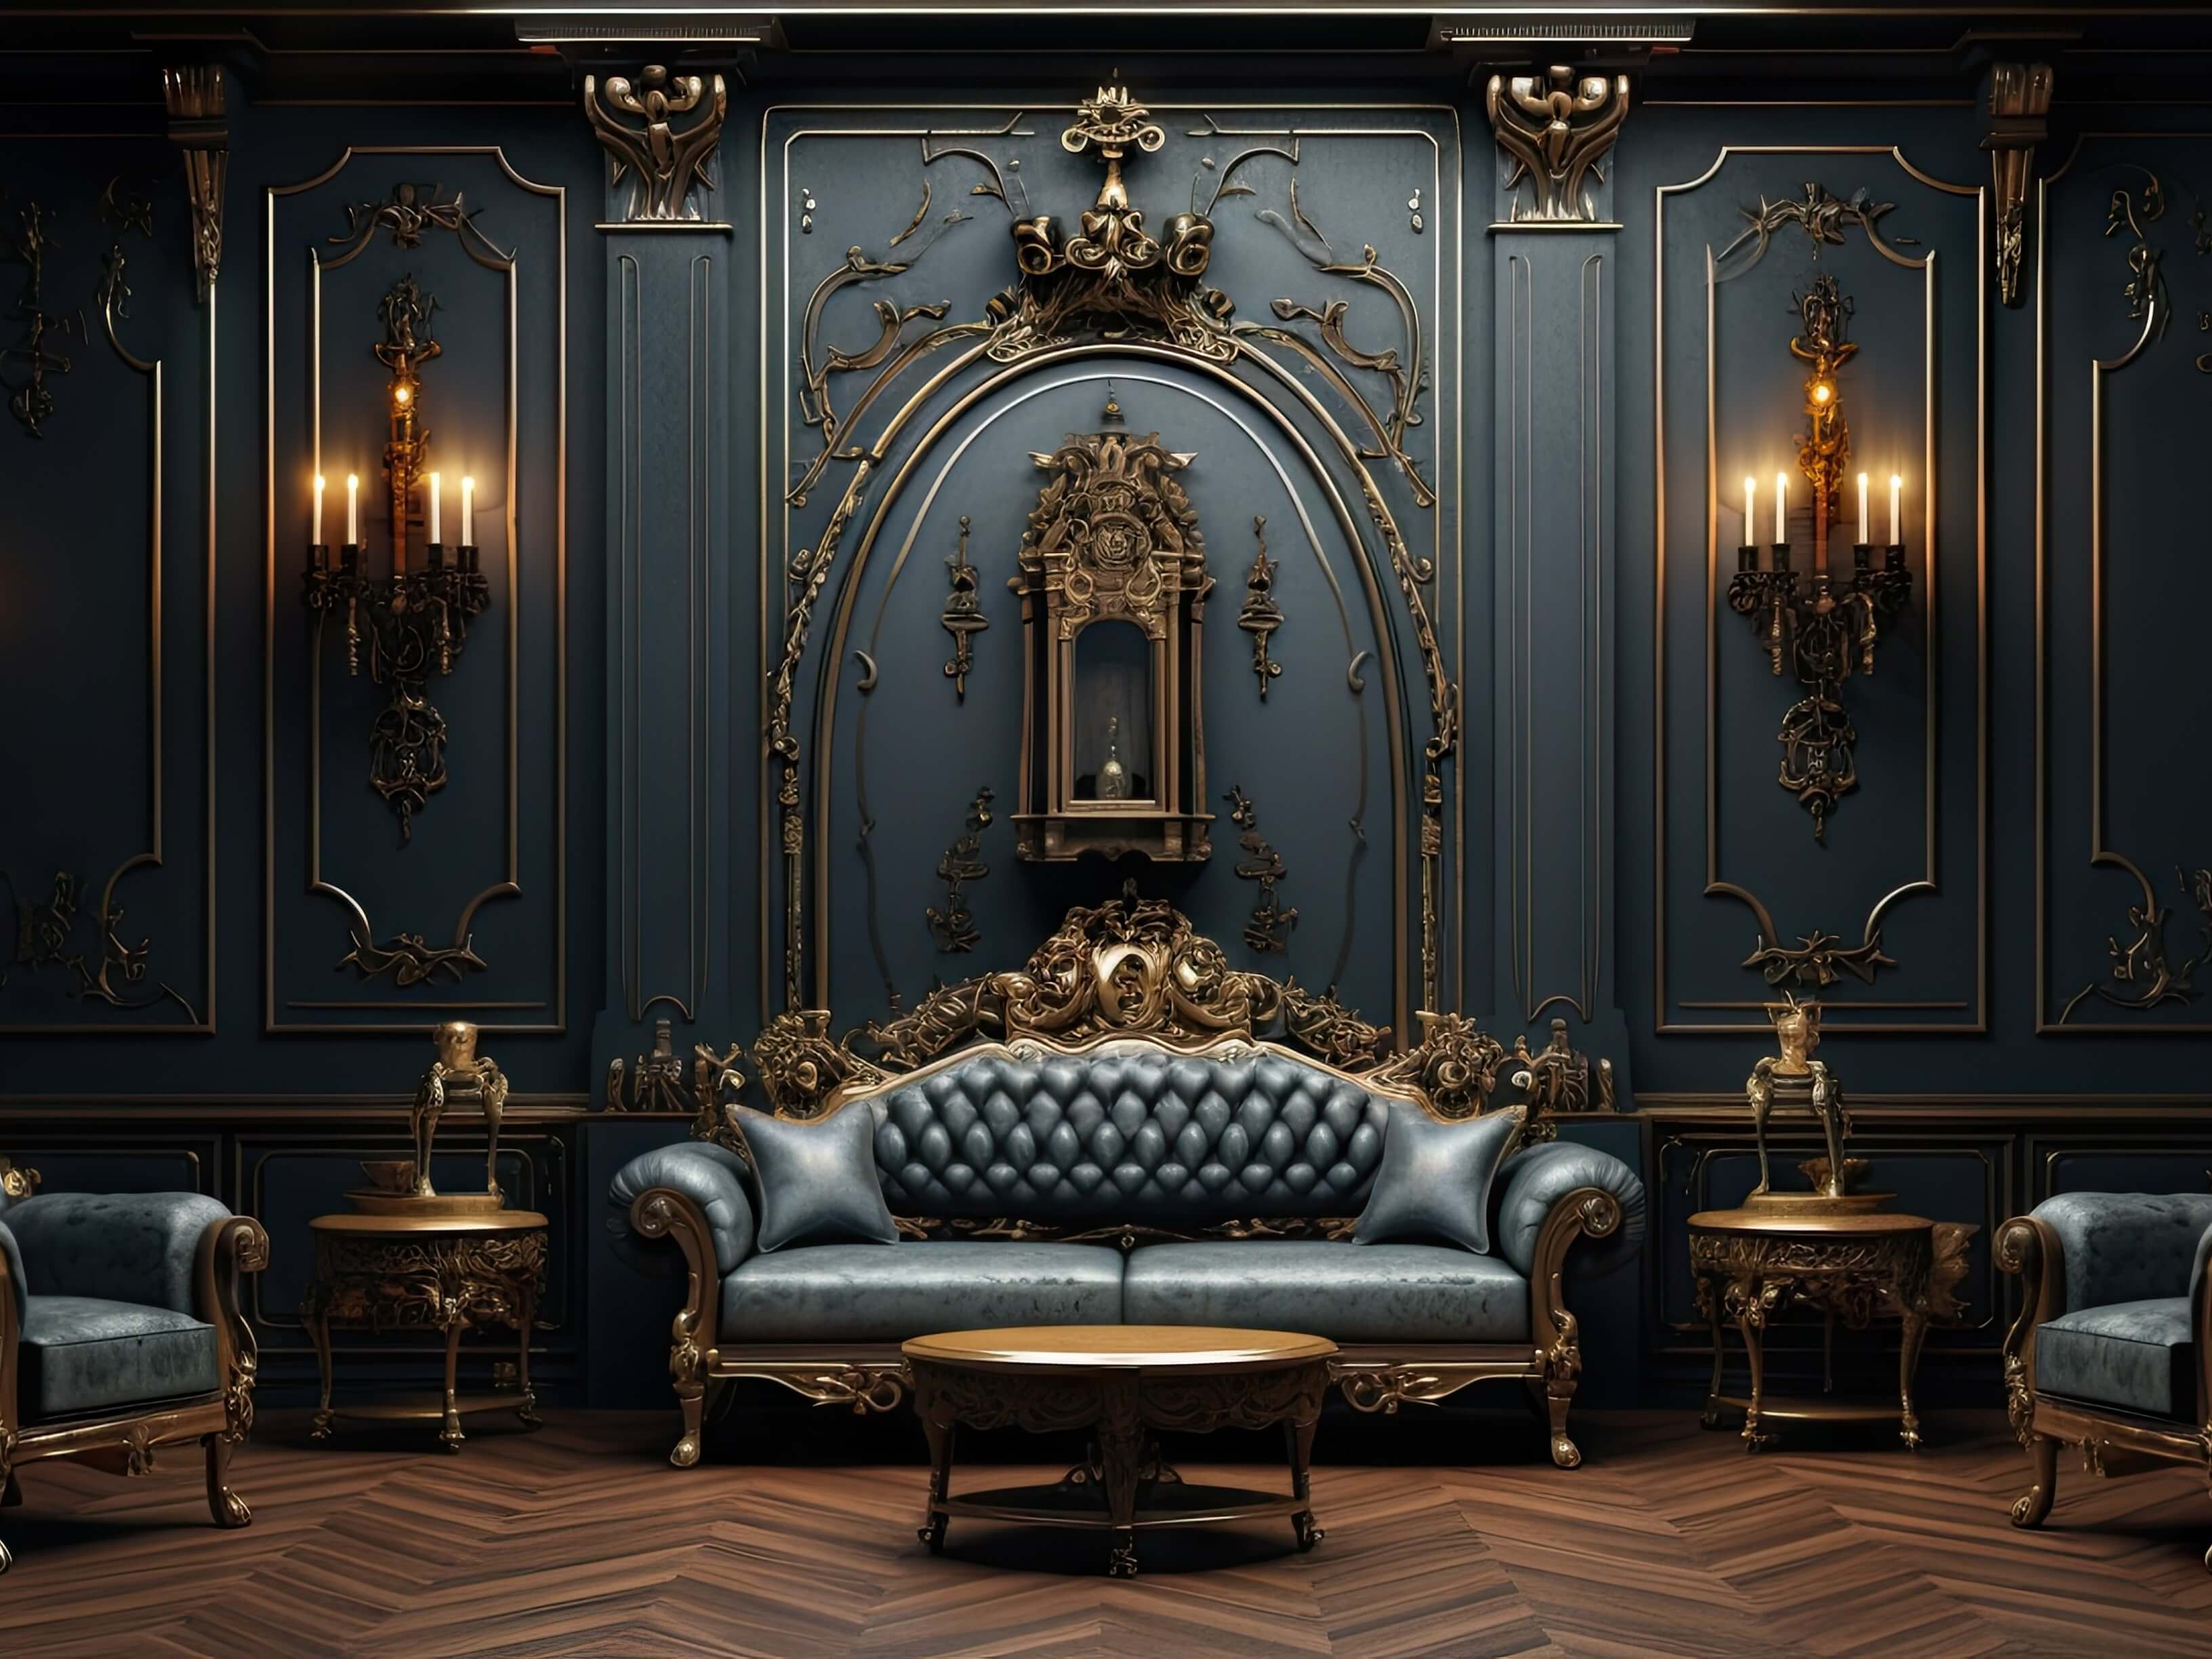 This image features a dark Renaissance themed room with ornate details